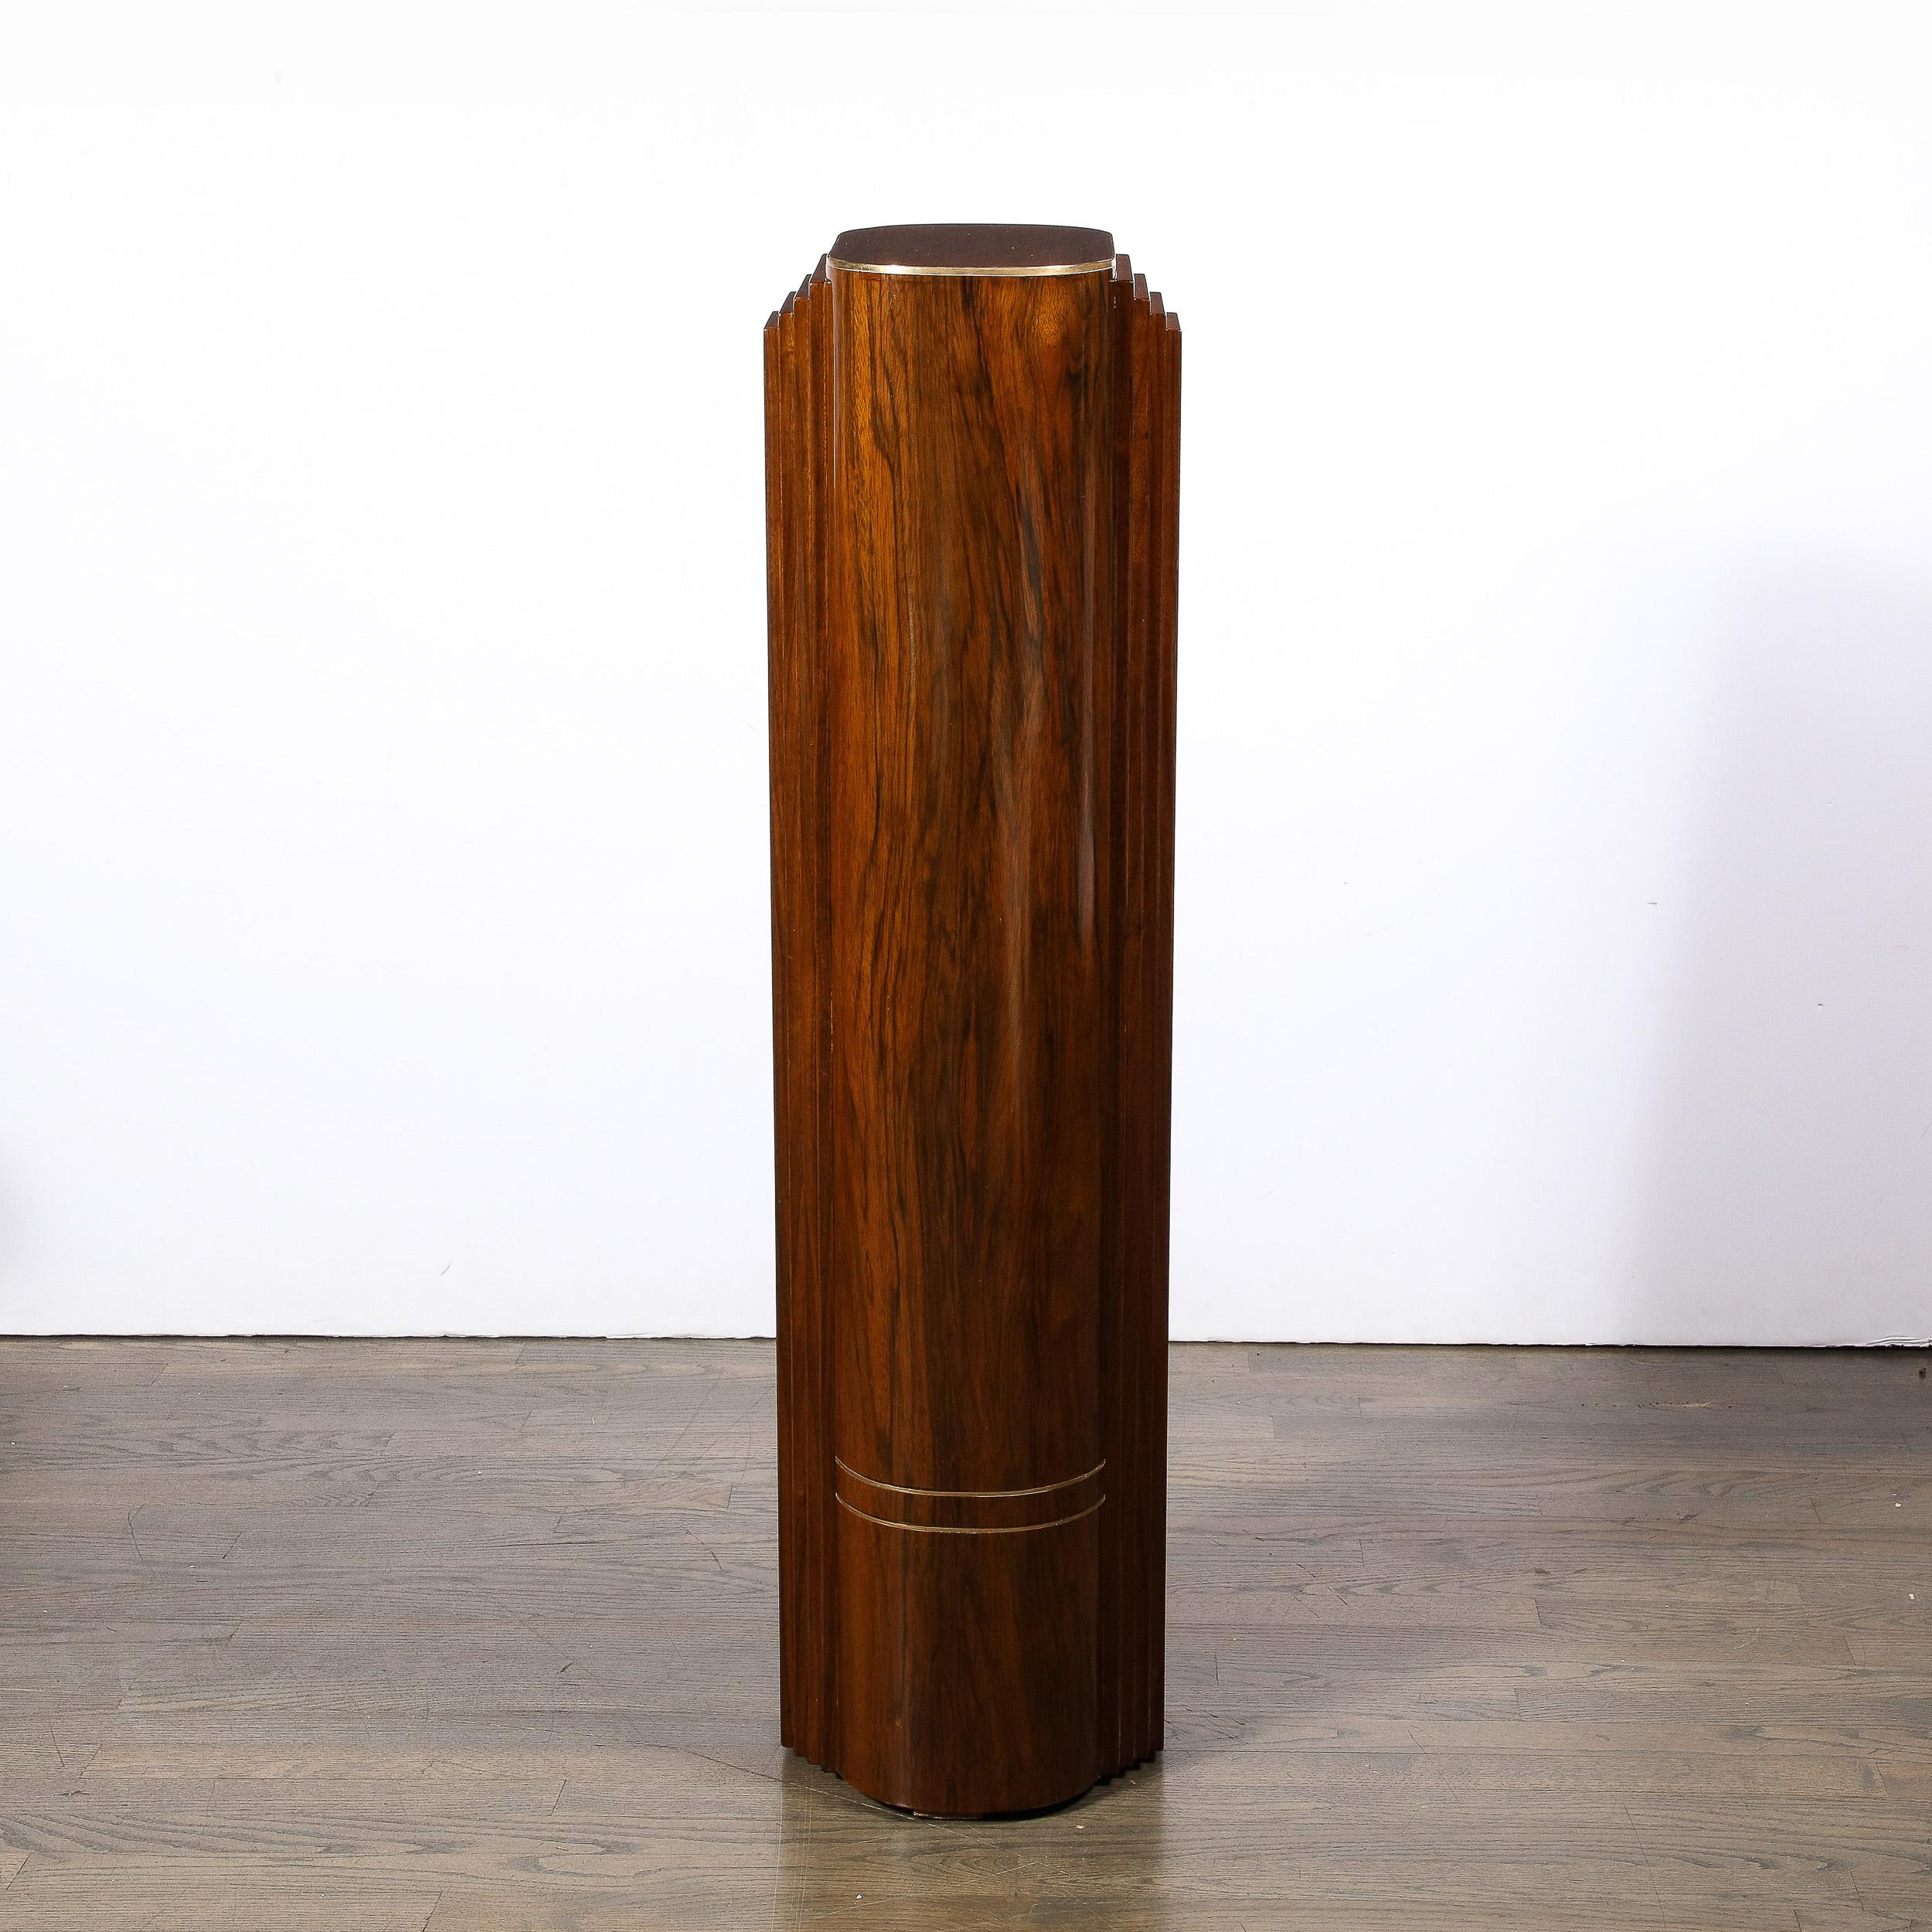 This remarkable Art Deco Skyscraper Style Hand-rubbed Book-matched Walnut Pedestal w/ Brass Inlays originates from France circa 1935. Featuring a construction in solid walnut with a beautiful hand-rubbed finish, one can observe subtle strips of